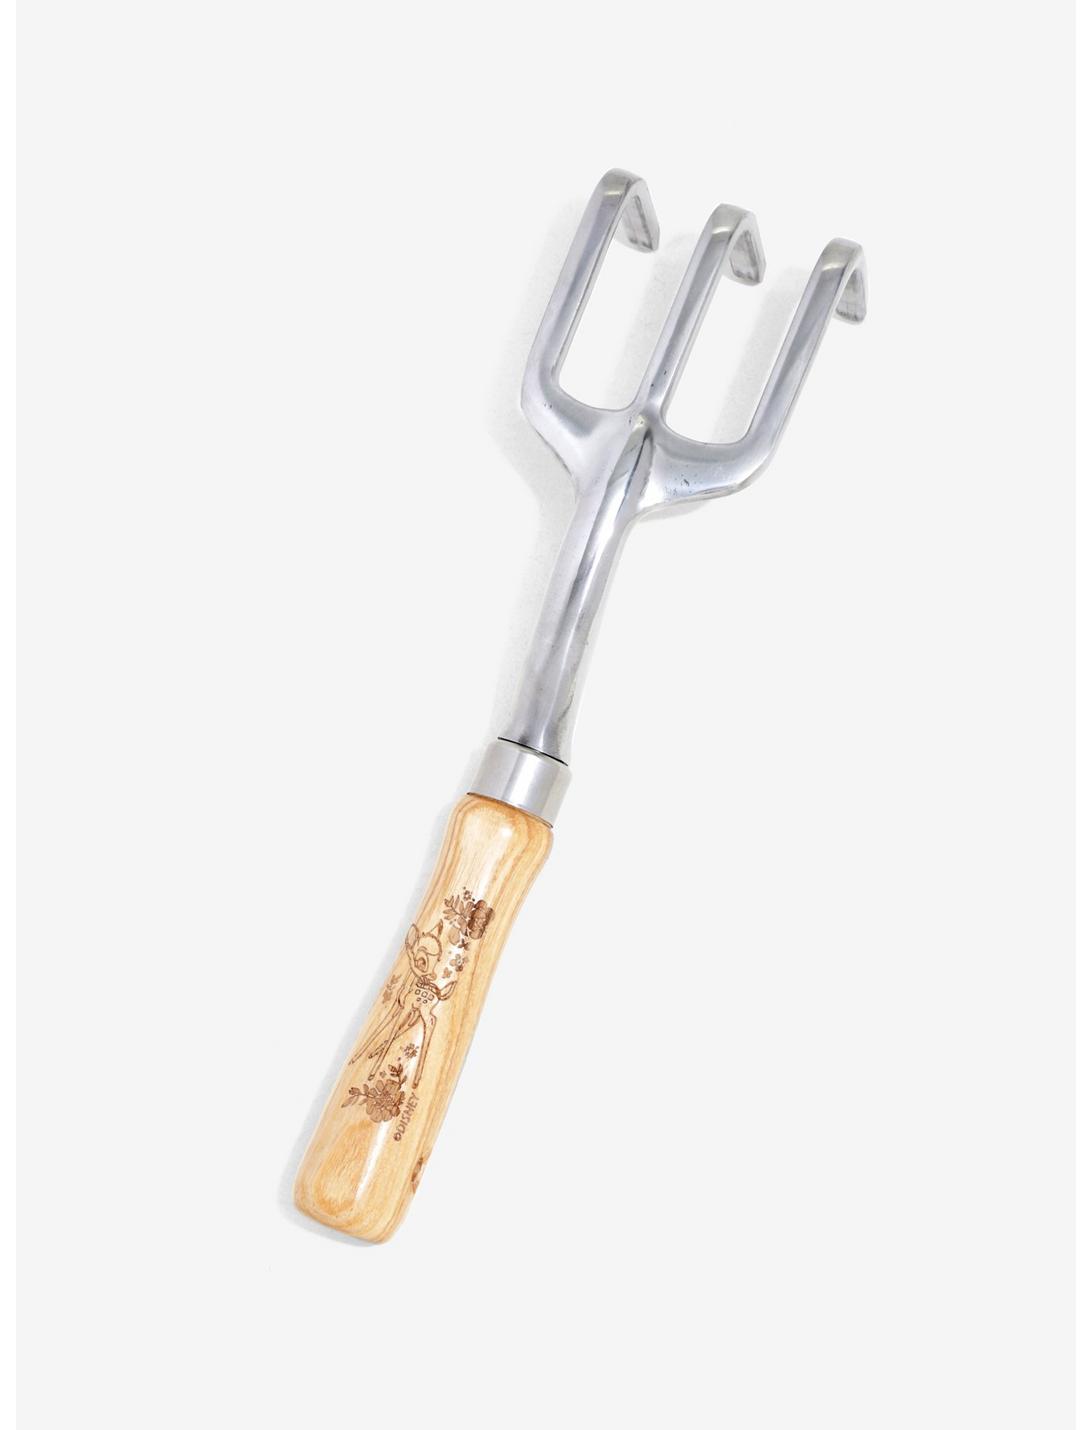 New Disney Bambi Wooden Handle Cultivator 